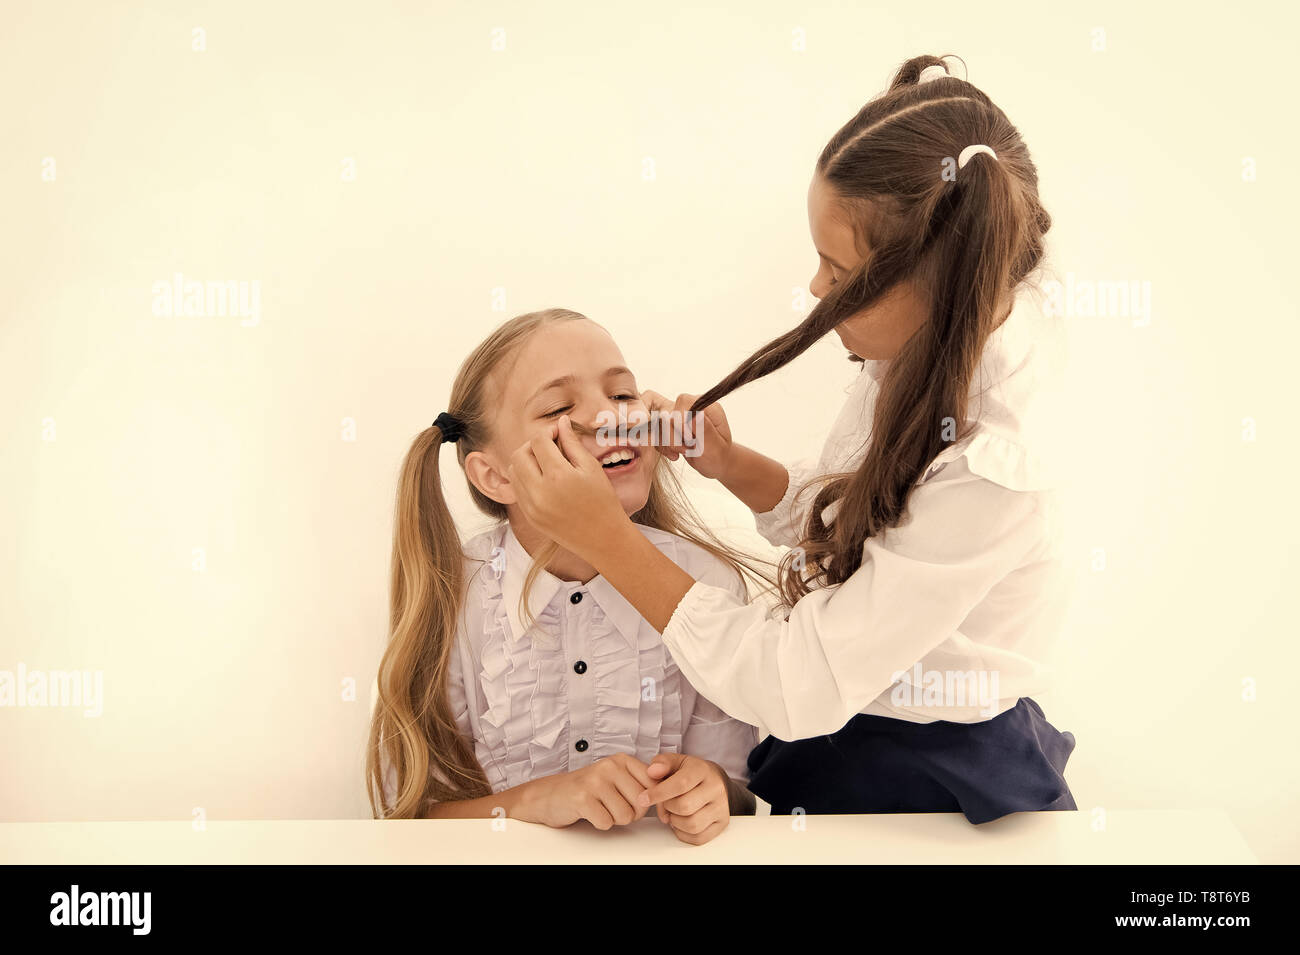 Girls make mustache with long hair. Lets imagine you were boy. Girl  cheerful playful mood play with hair as mustache. Masculinity and femininity  concept. Hairstyle fashion. Schoolgirls tidy uniforms Stock Photo -